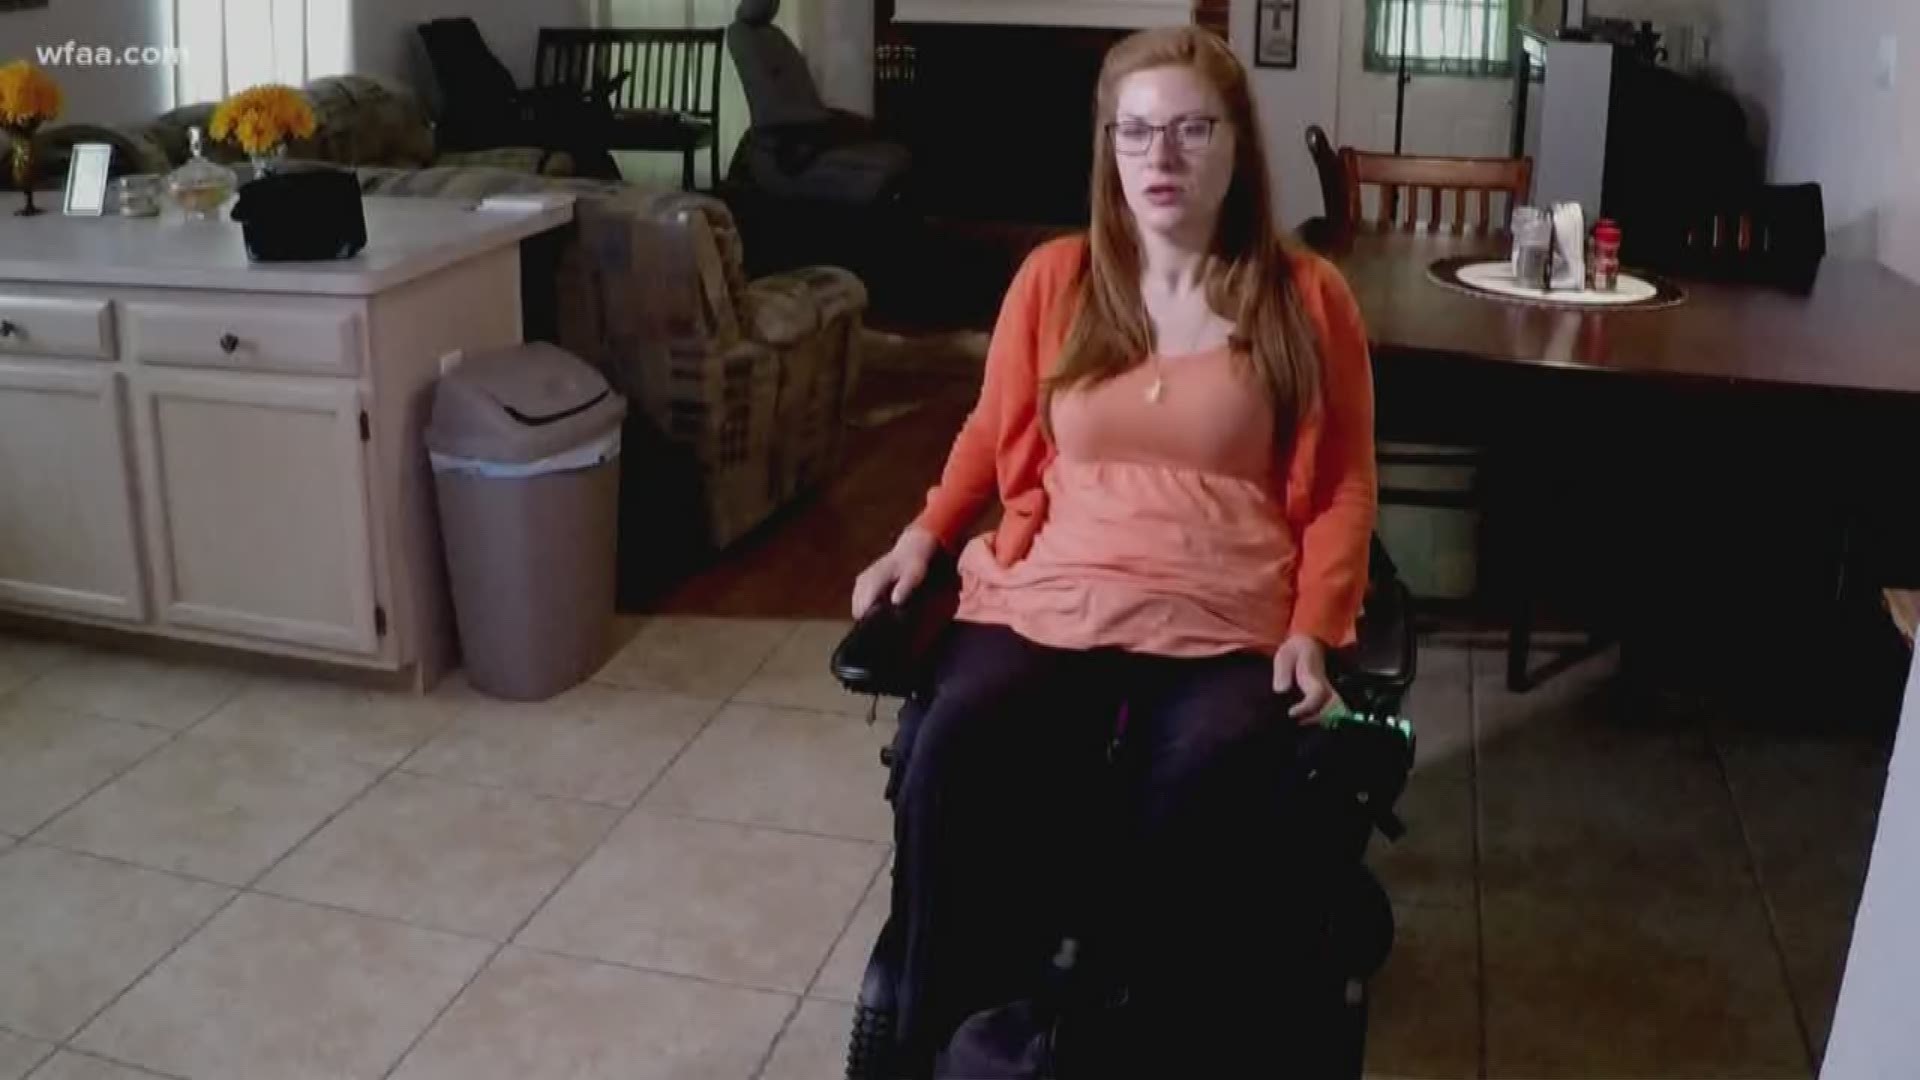 Tonya Winchester was paralyzed just weeks after her high school graduation.